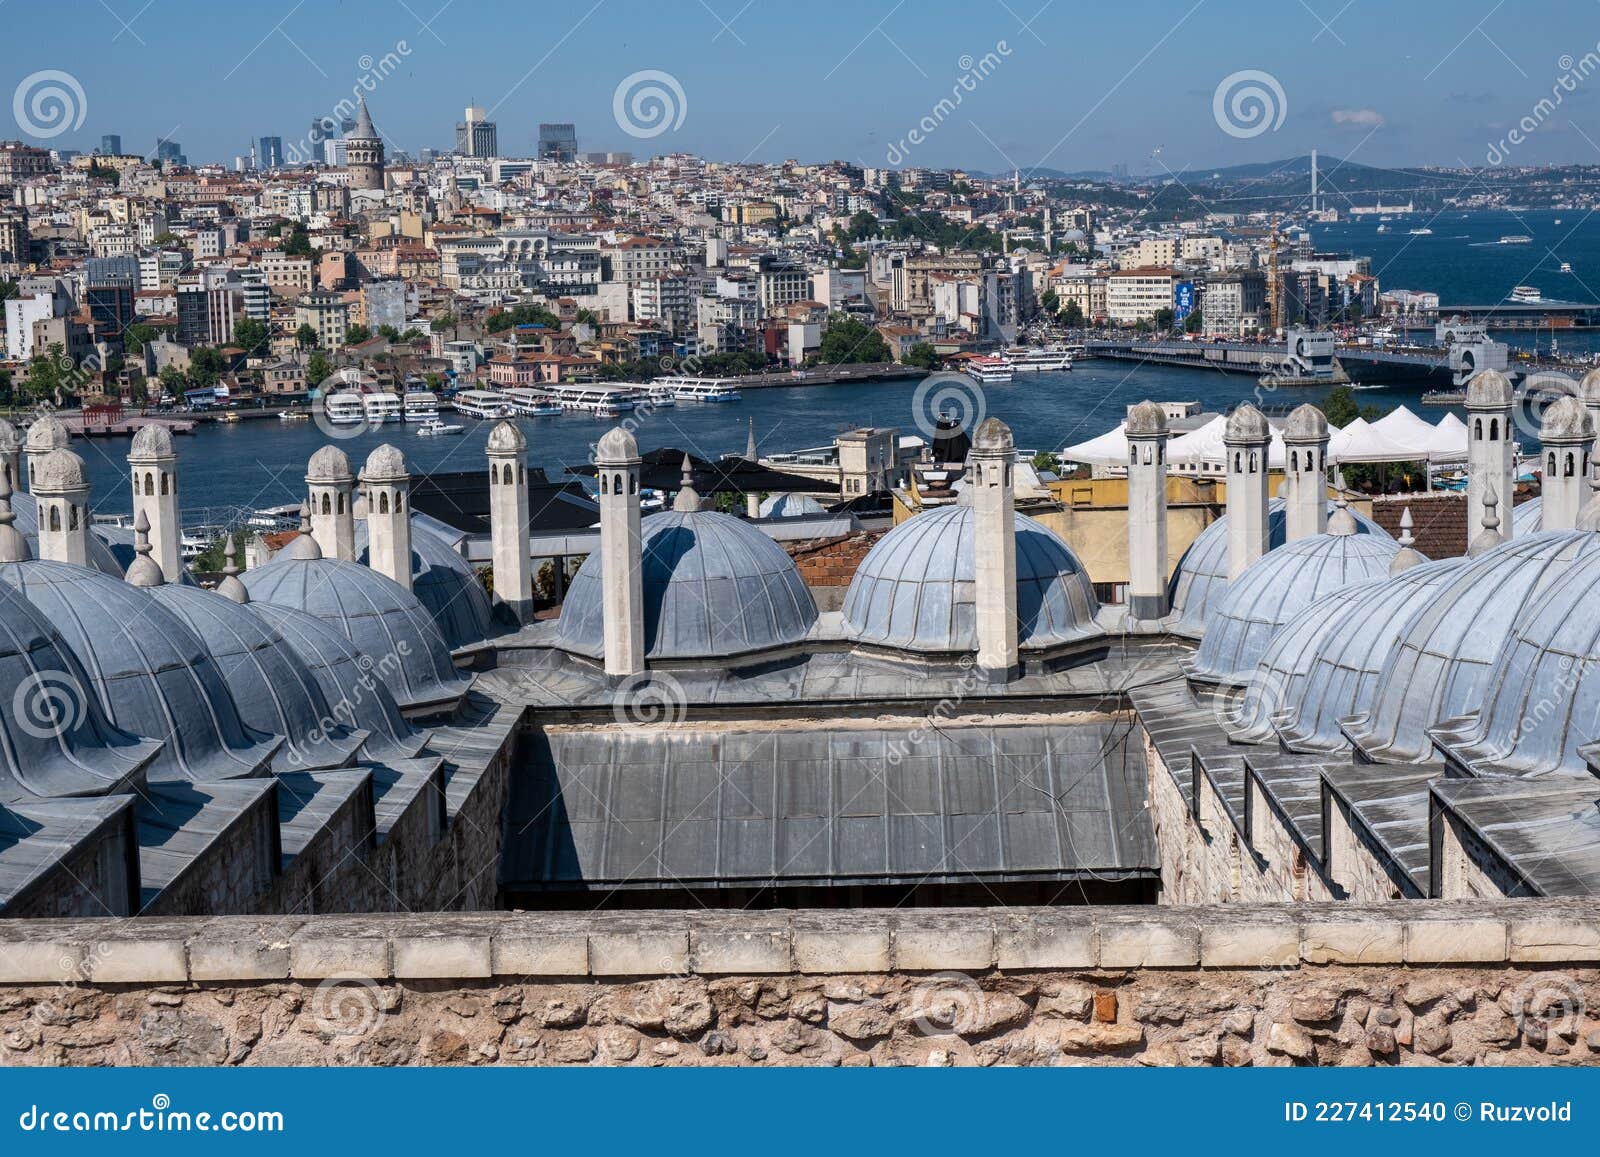 view of istanbul and the bosphorus strait from sÃÂ¼leymaniye camii mosque